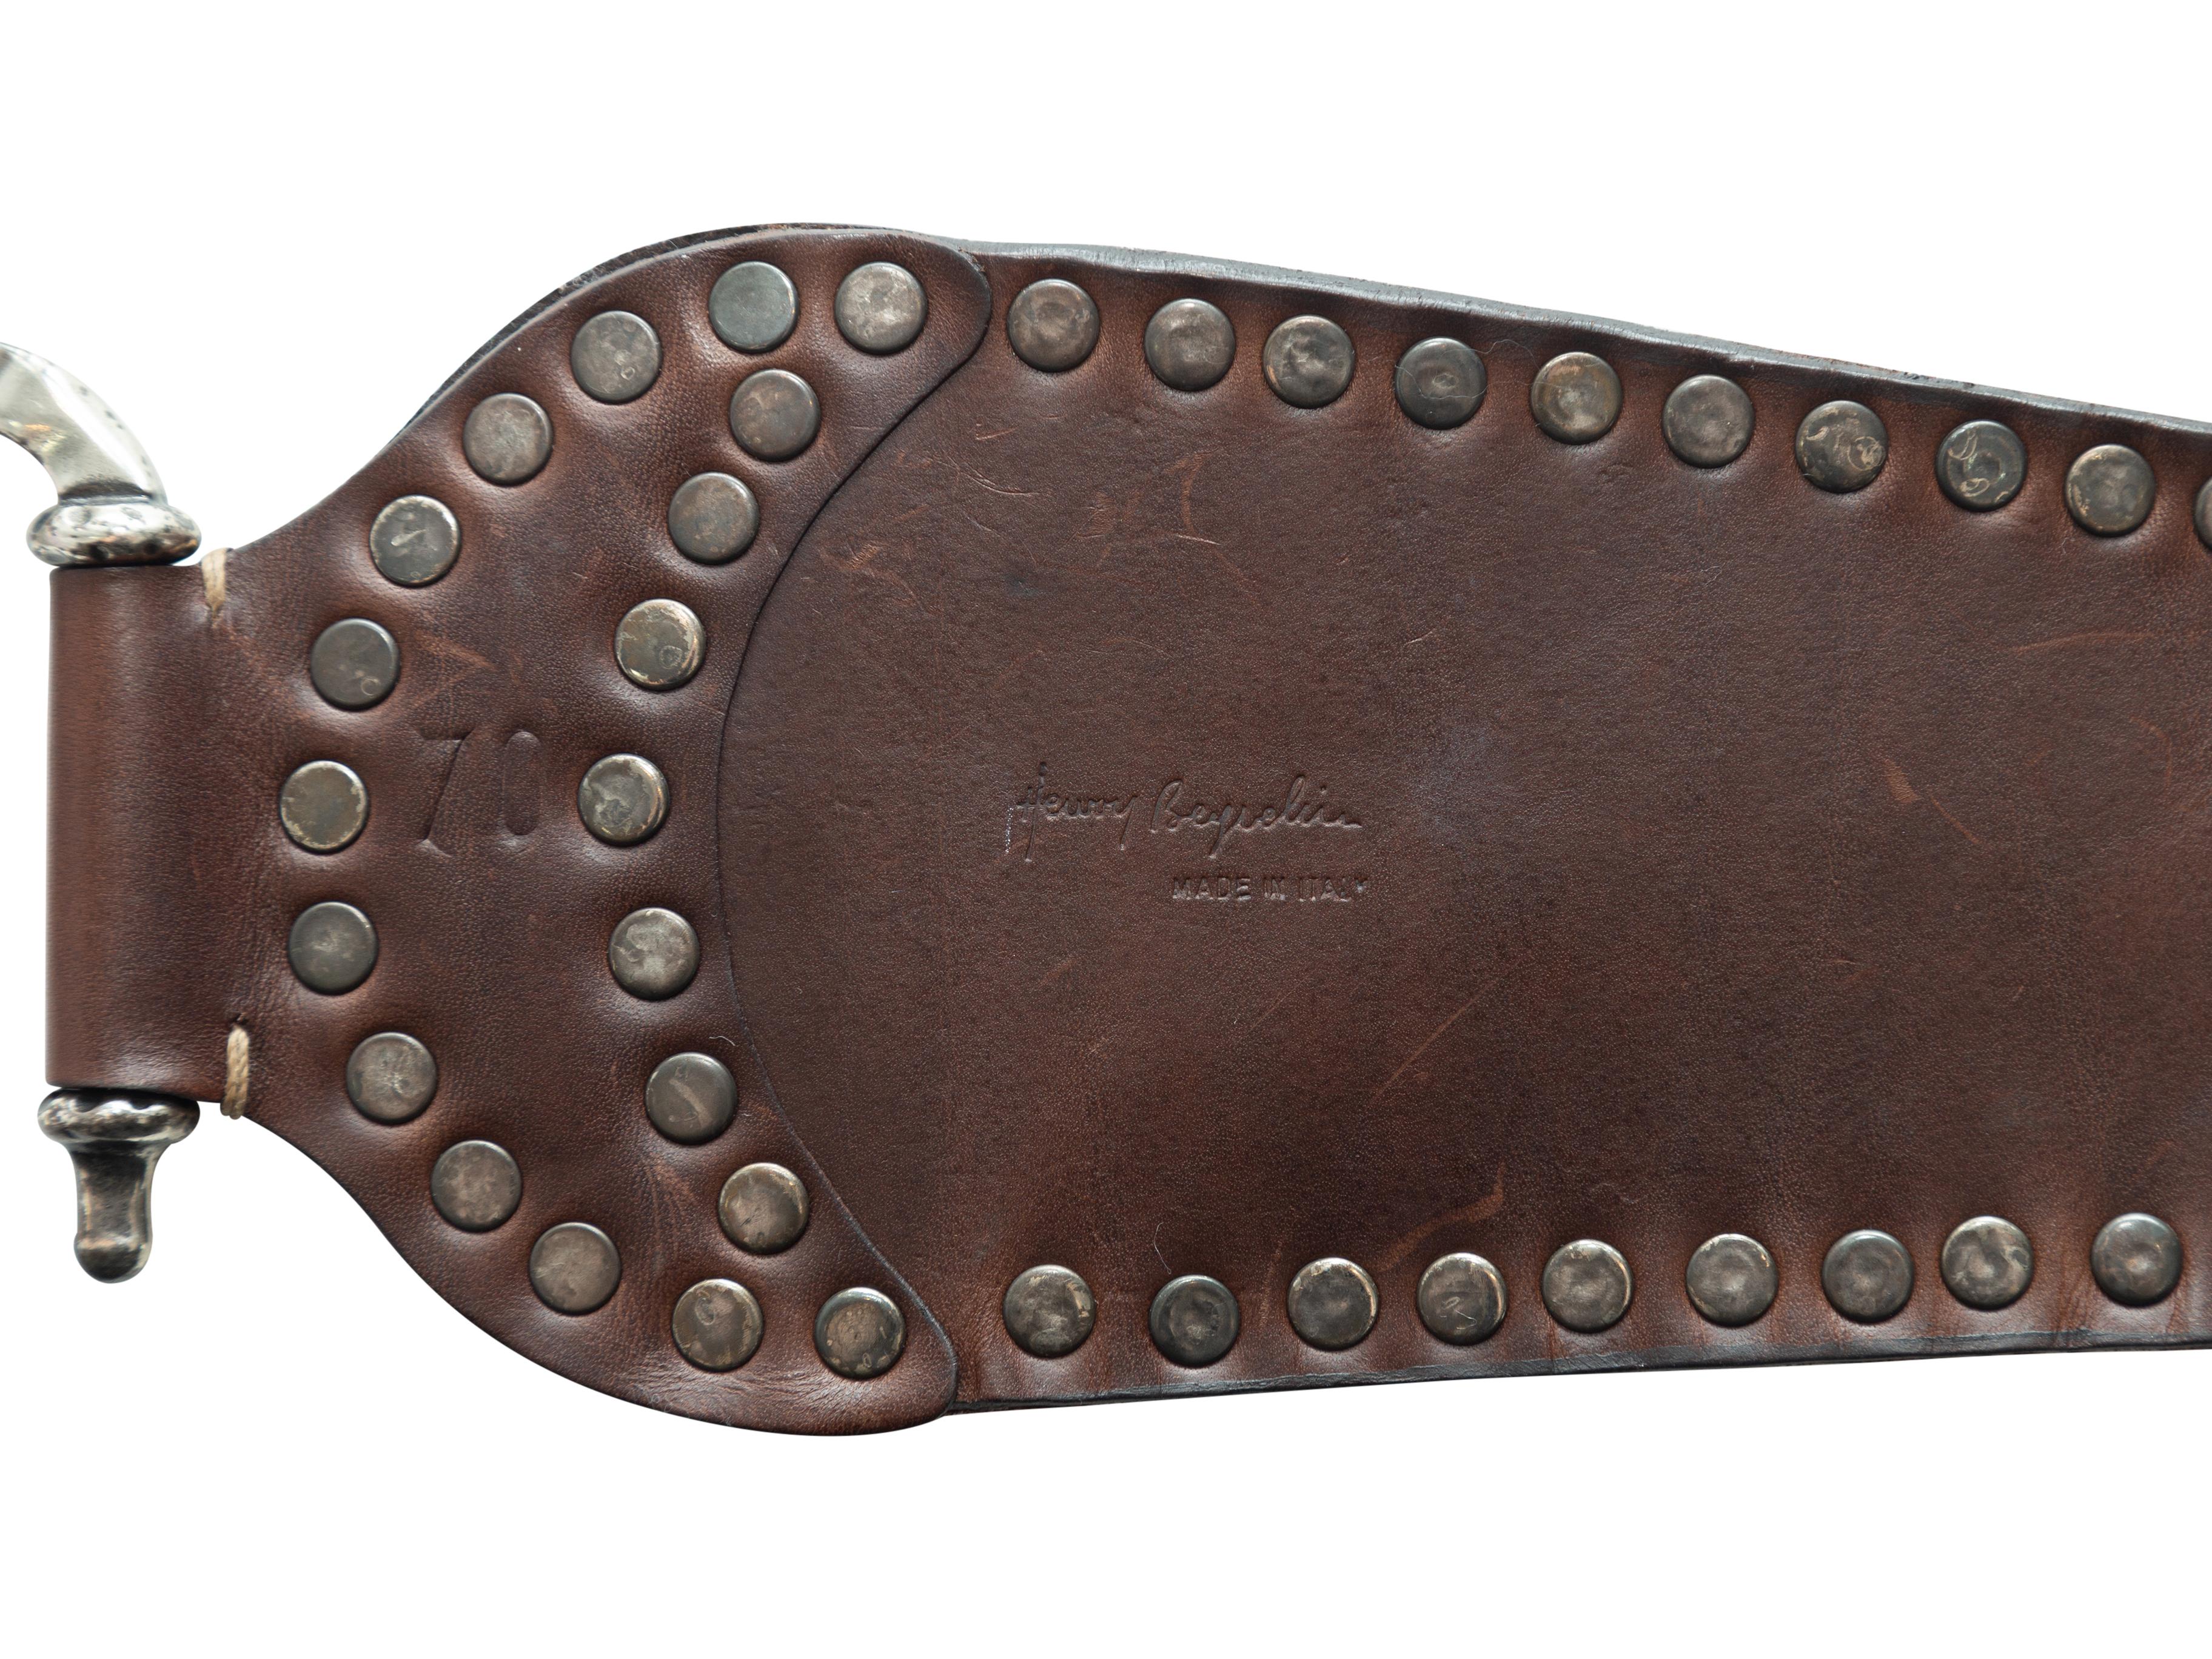 Product Details: Dark brown leather textured studded belt by Henry Beguelin. Silver-tone hook closure at front. 3.5